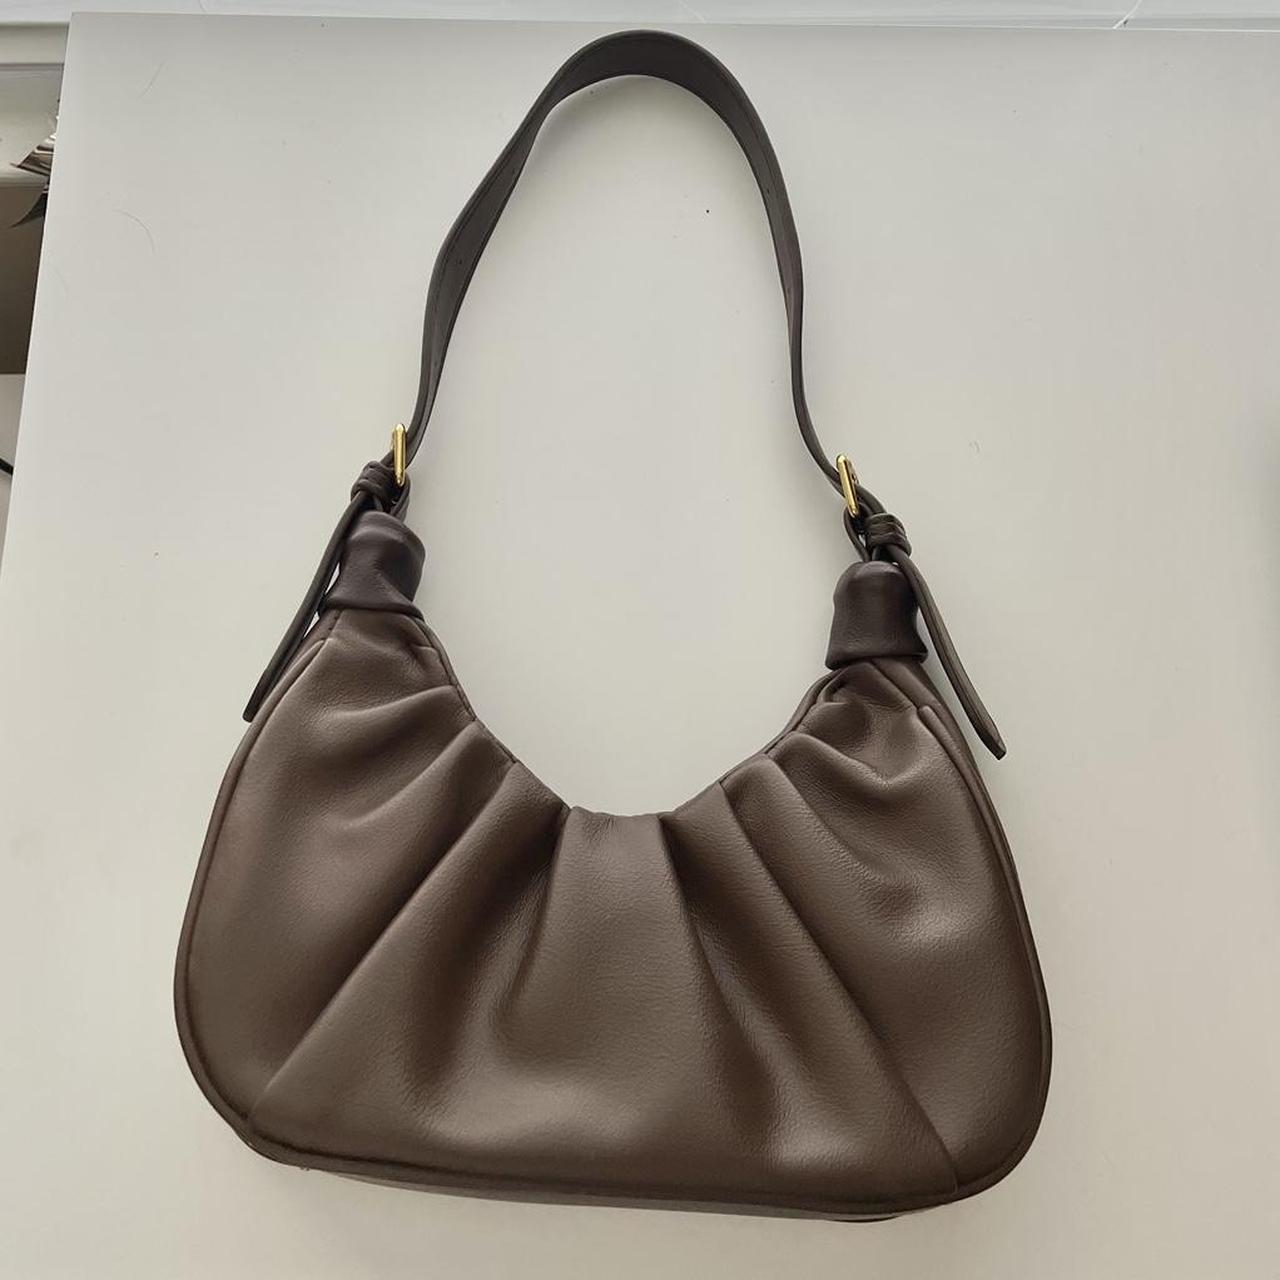 Brown faux leather bag Brand new - never worn... - Depop